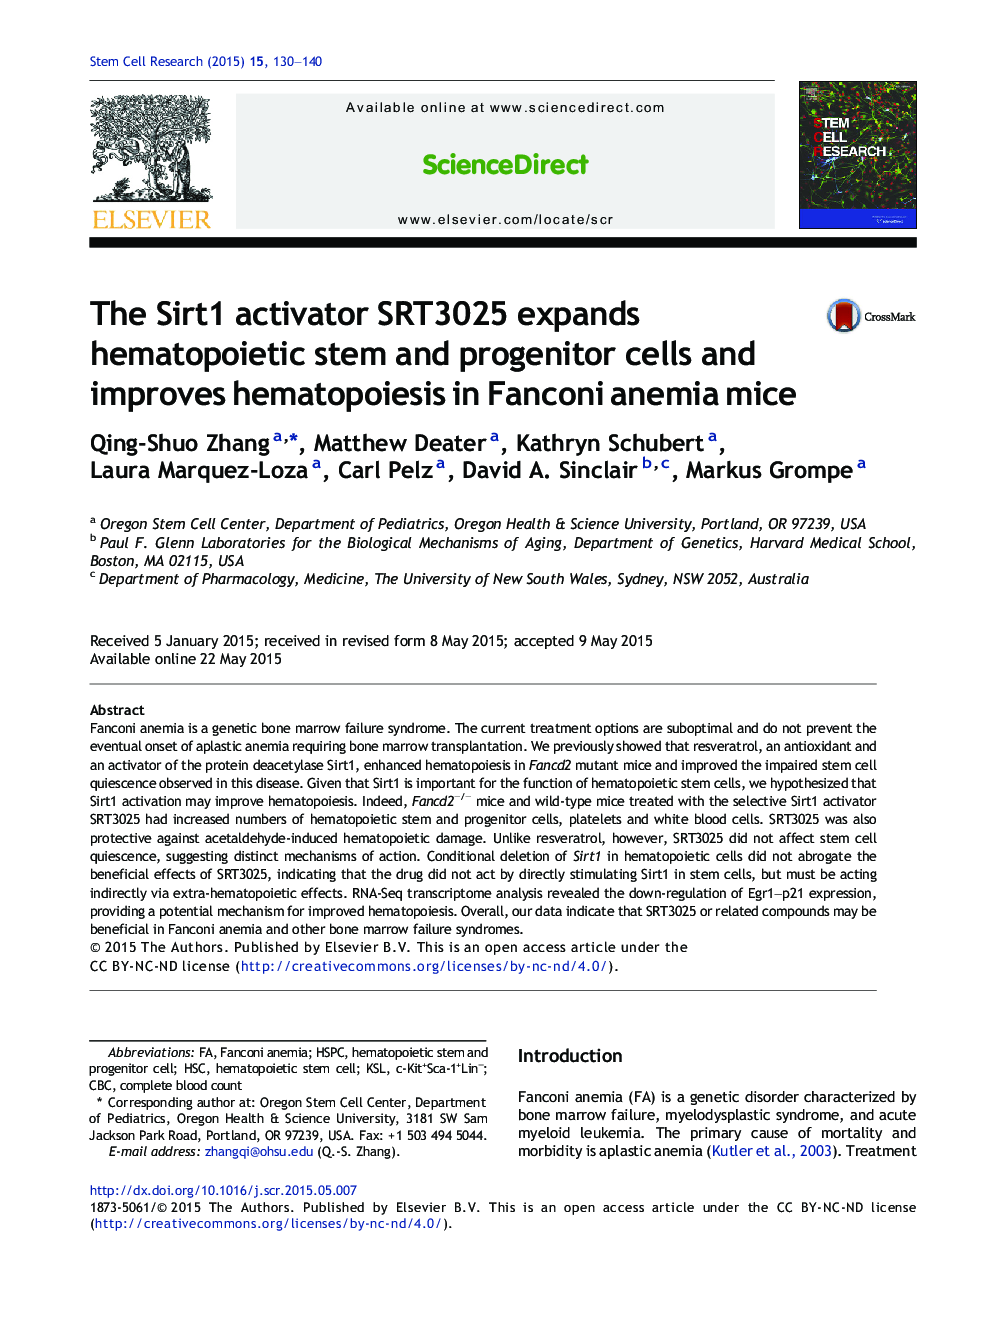 The Sirt1 activator SRT3025 expands hematopoietic stem and progenitor cells and improves hematopoiesis in Fanconi anemia mice